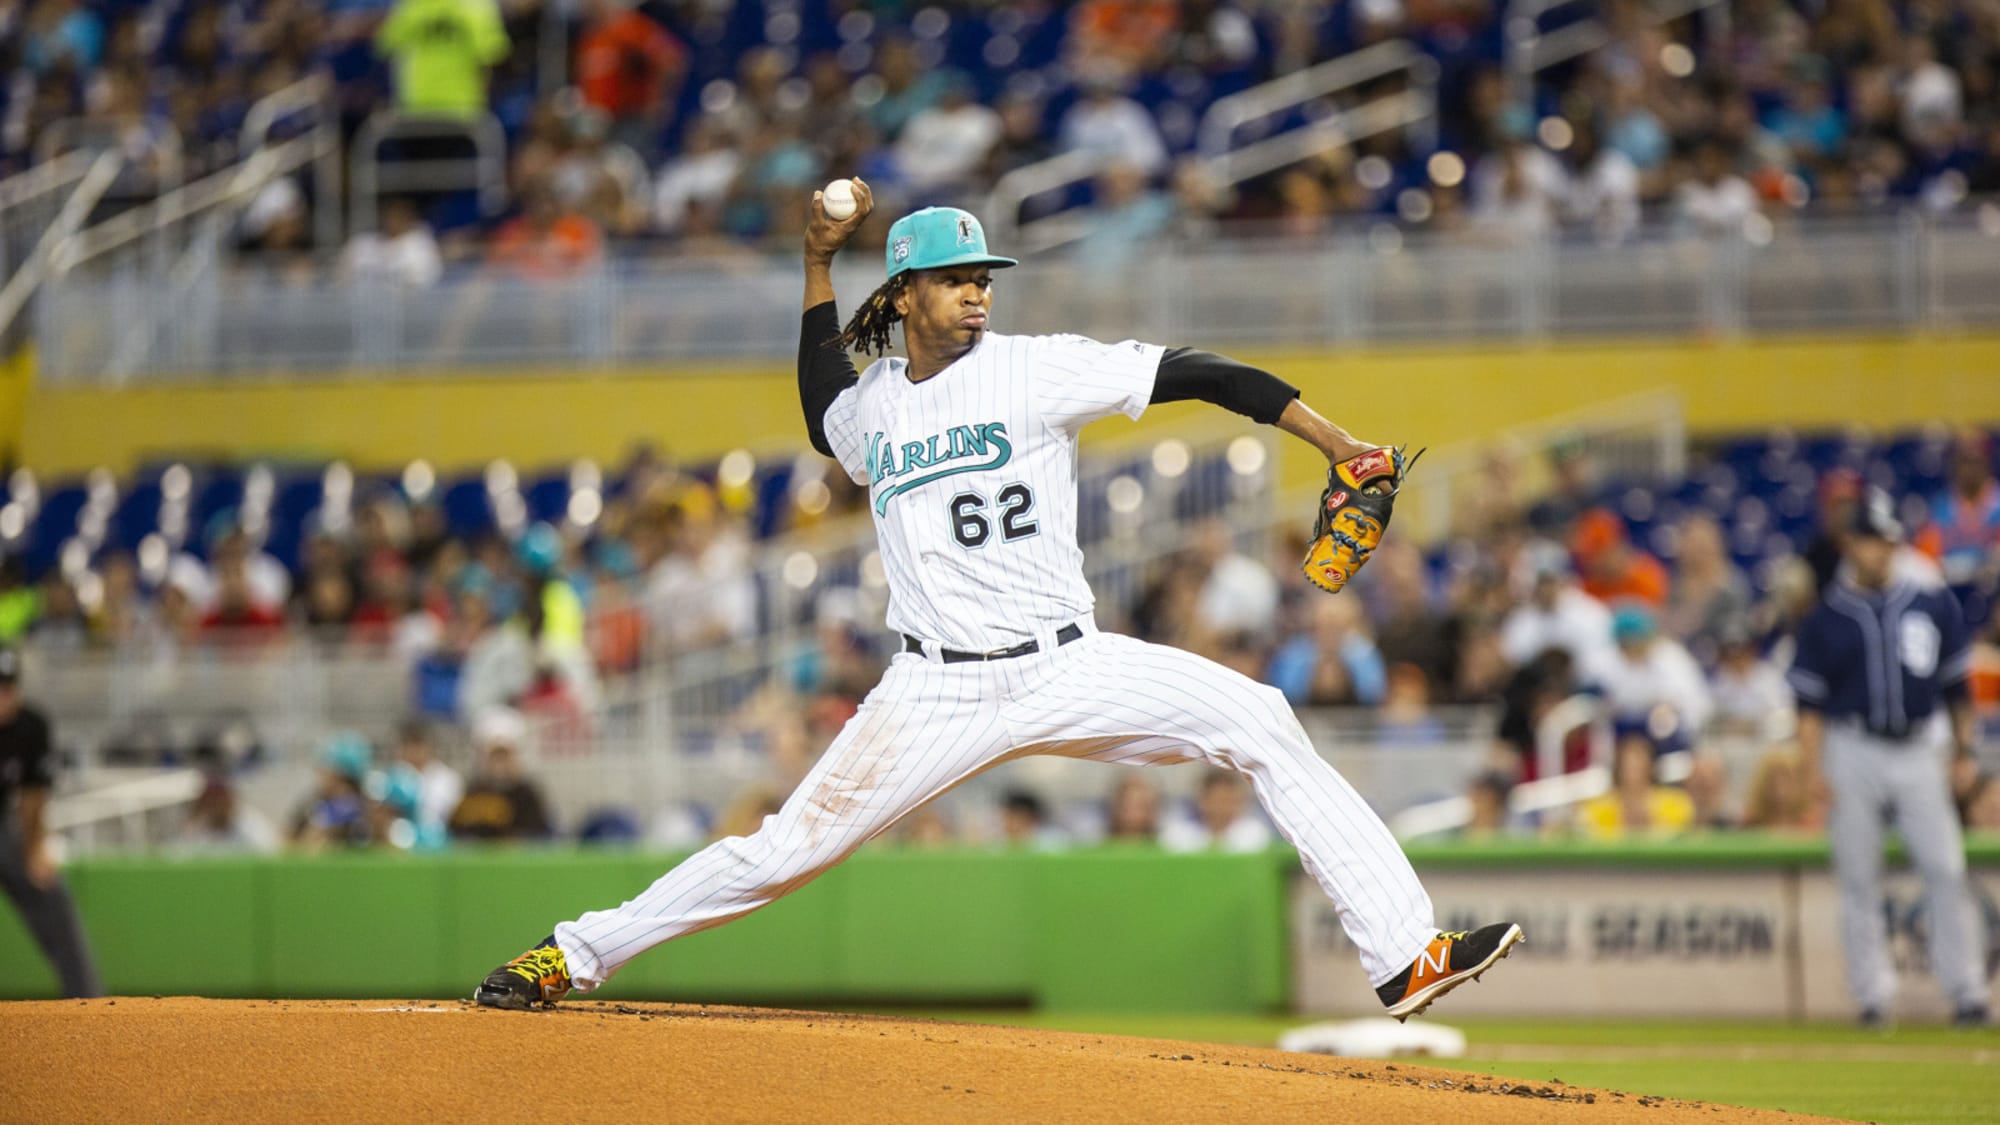 miami marlins teal jersey